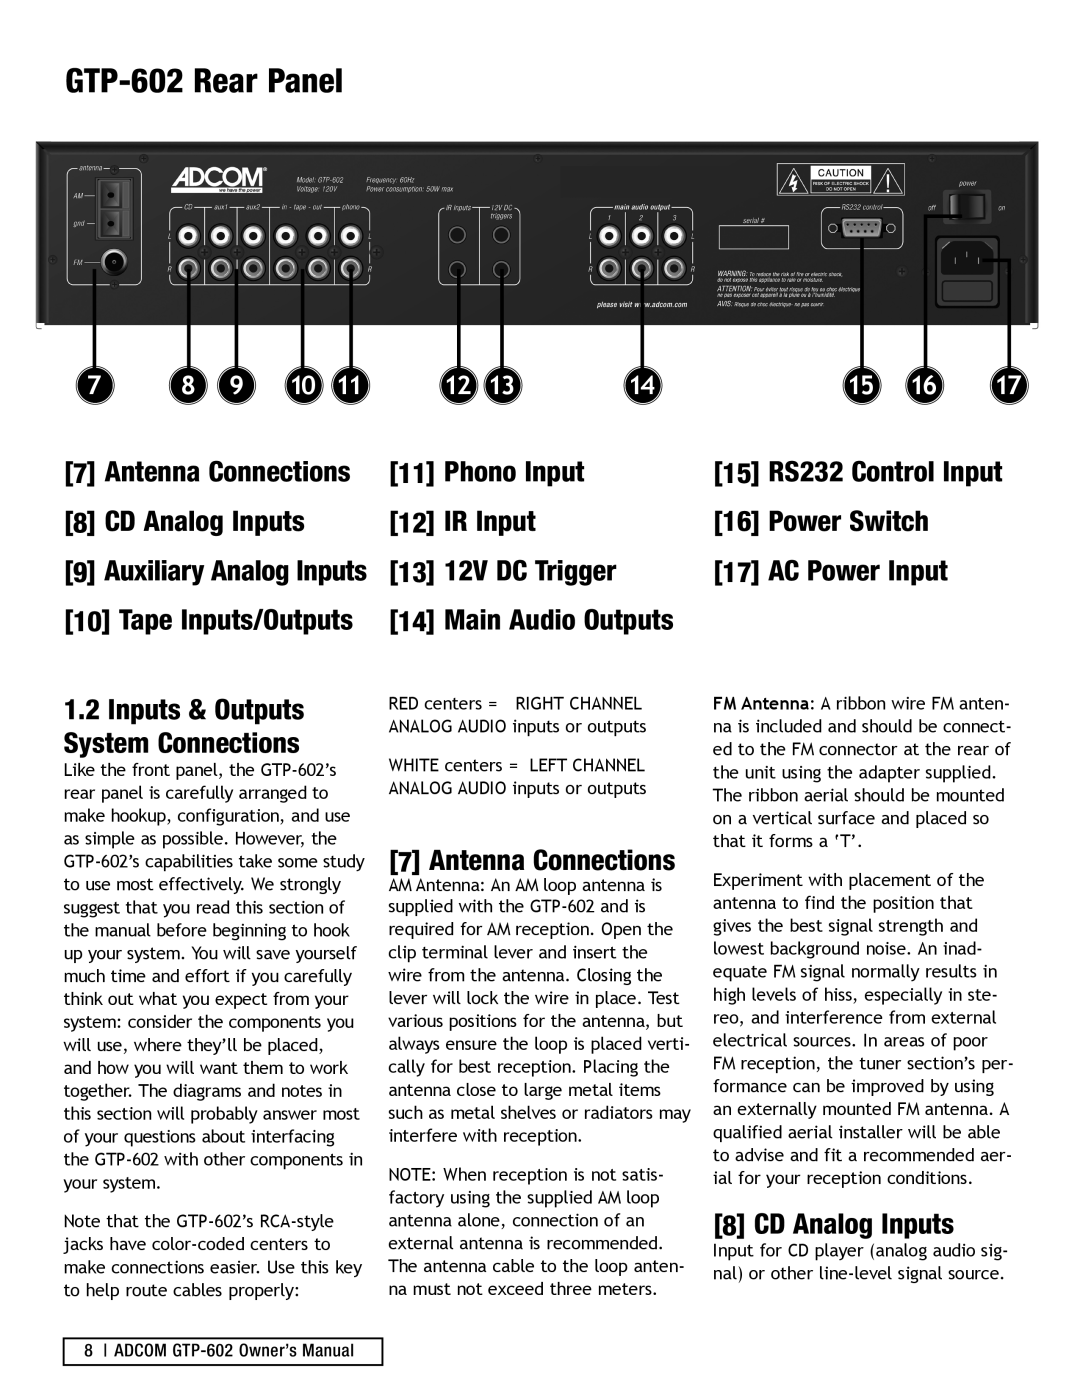 Adcom manual GTP-602Rear Panel, Antenna Connections 8 CD Analog Inputs, Auxiliary Analog Inputs 10 Tape Inputs/Outputs 